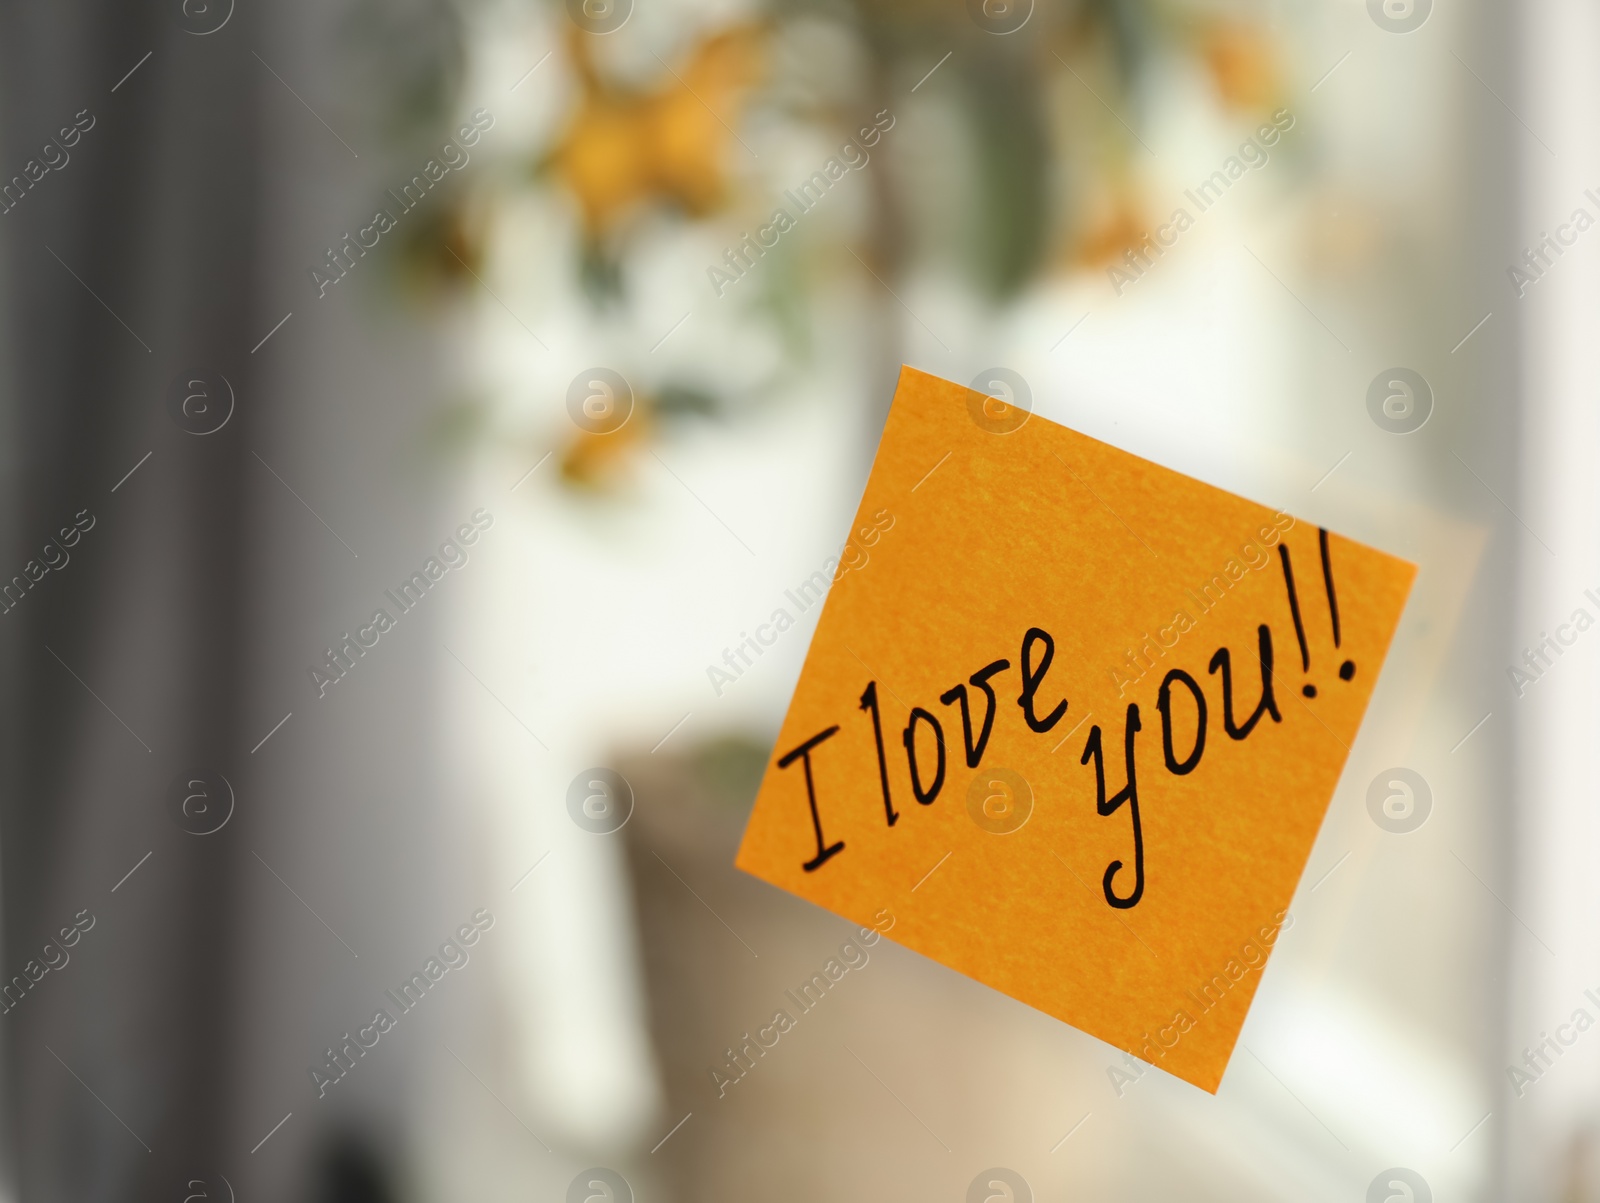 Photo of Sticky note with handwritten text I Love you attached to mirror in room, closeup. Romantic message